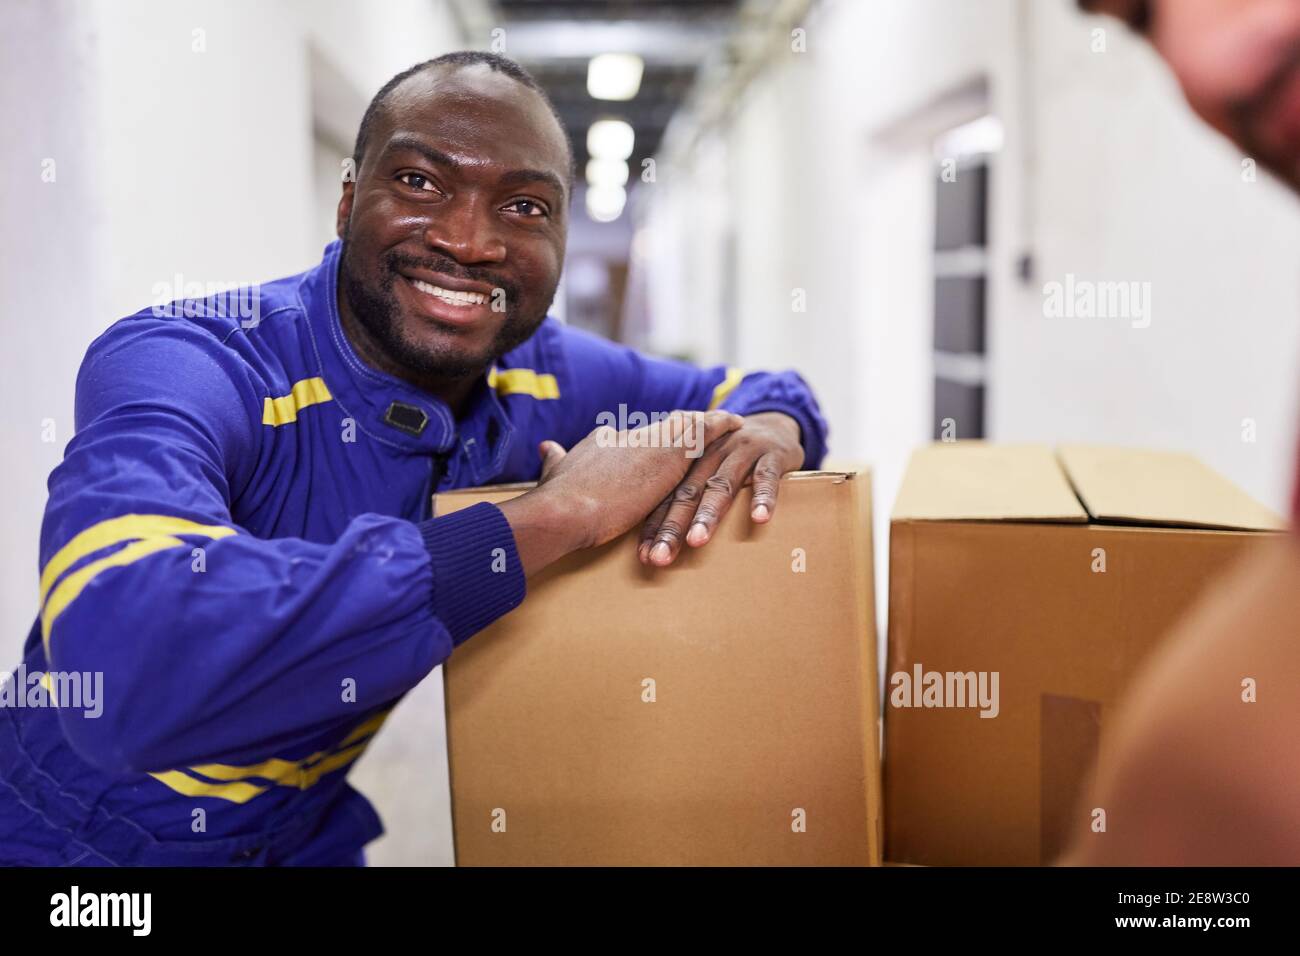 African worker as a mini jobber or temporary worker with parcels at a shipping company Stock Photo